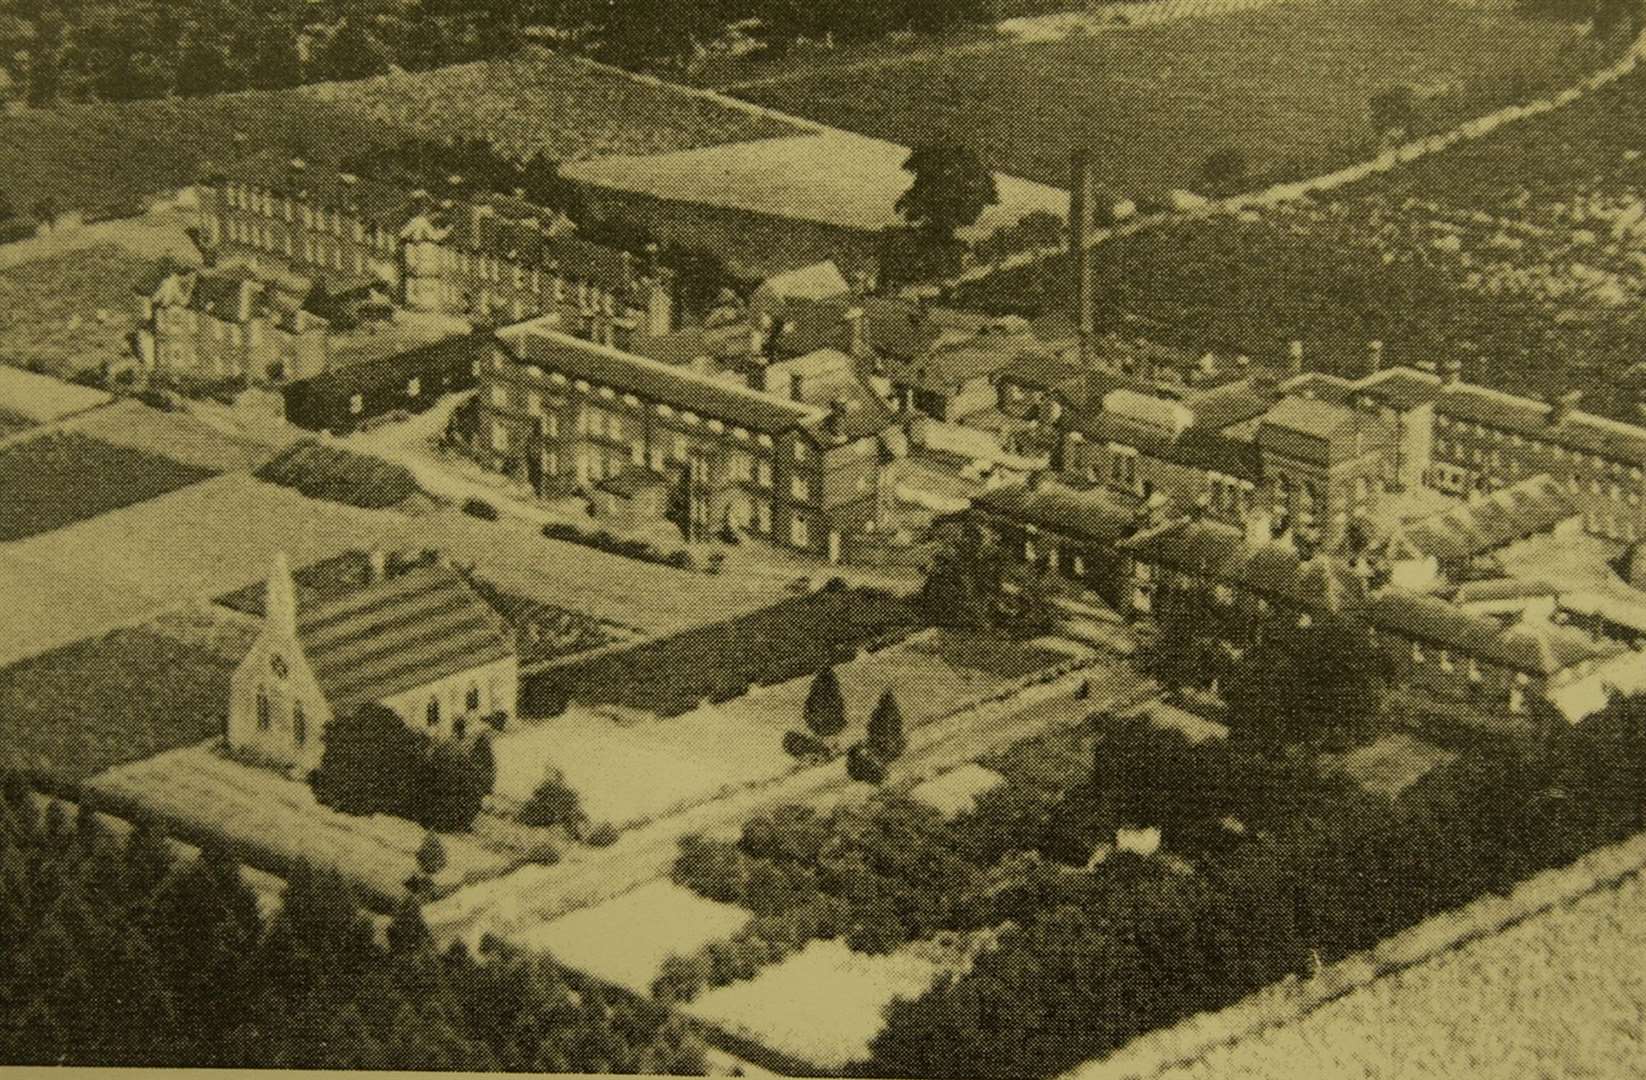 The workhouse in West Malling